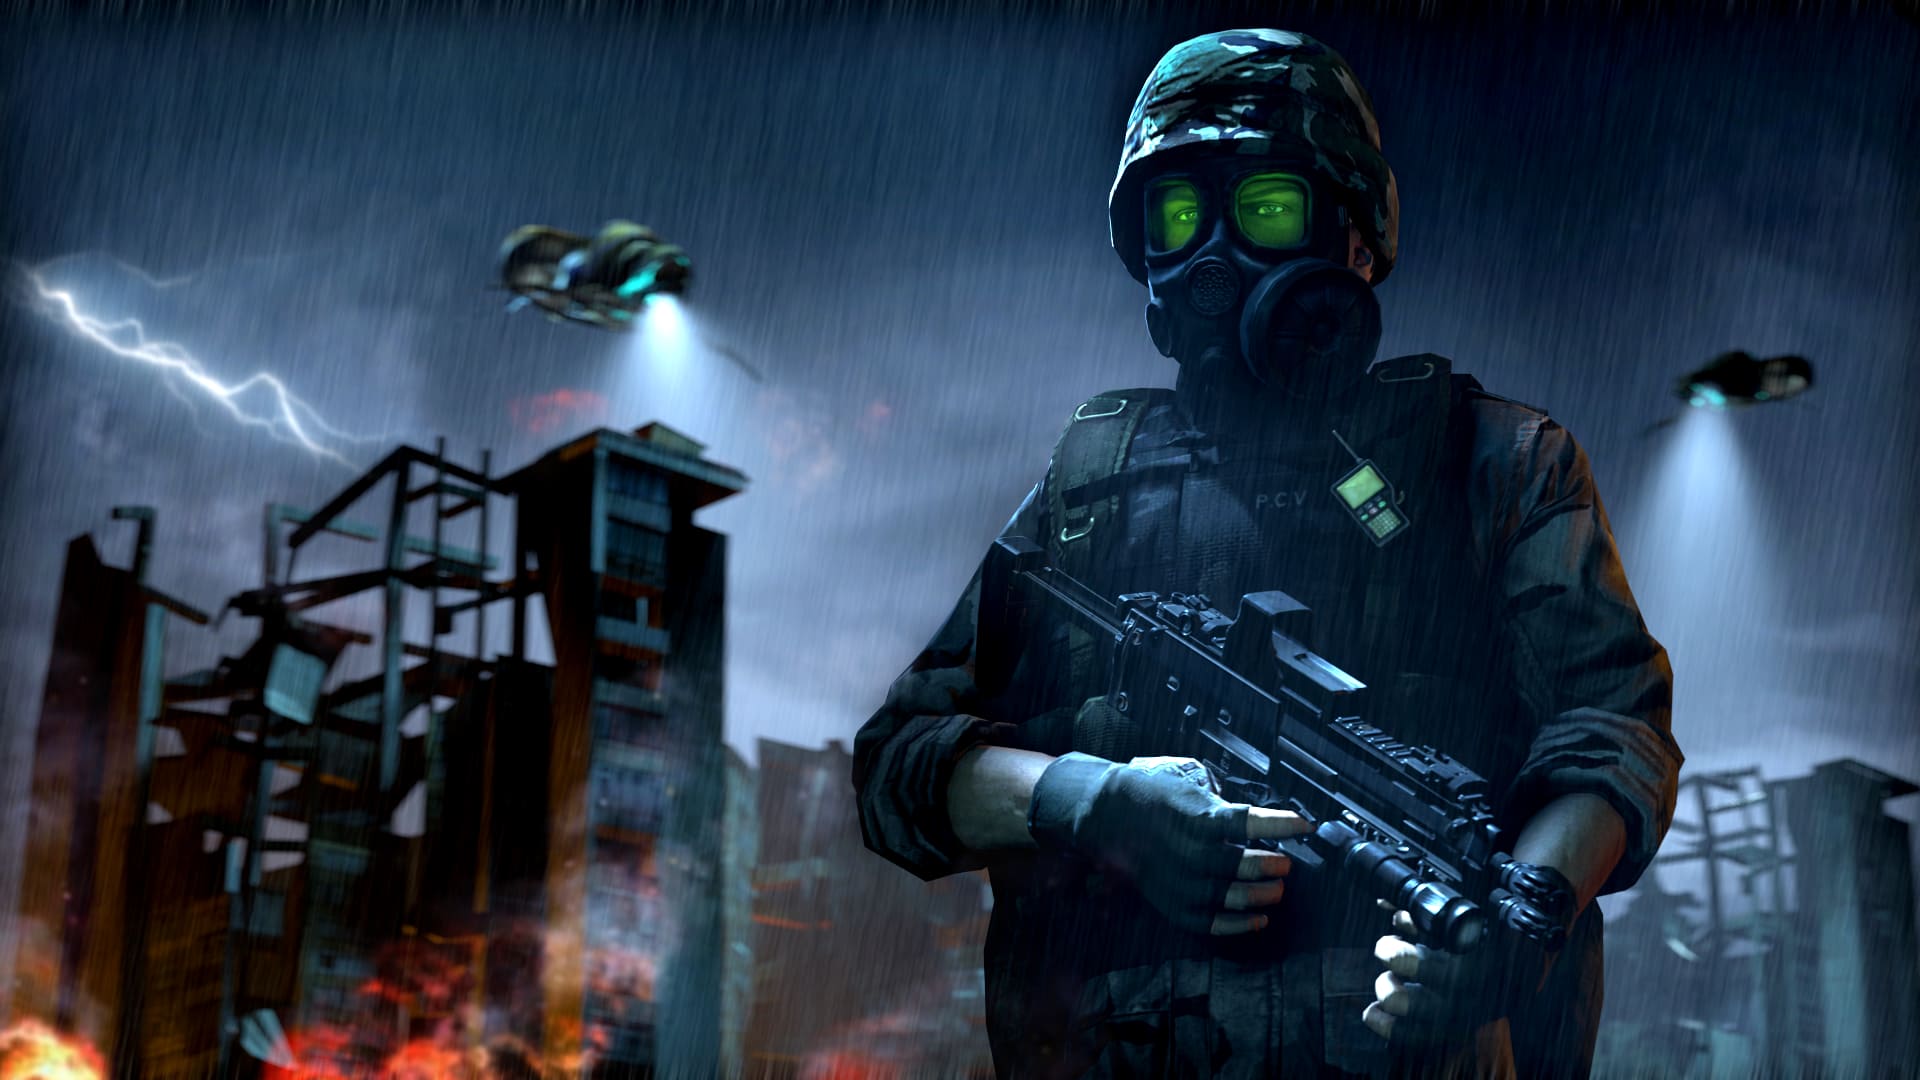 Corporal Adrian Shephard stands in front of City 17 ruins as two Combine gunships fly over the sky during a thunderstorm.